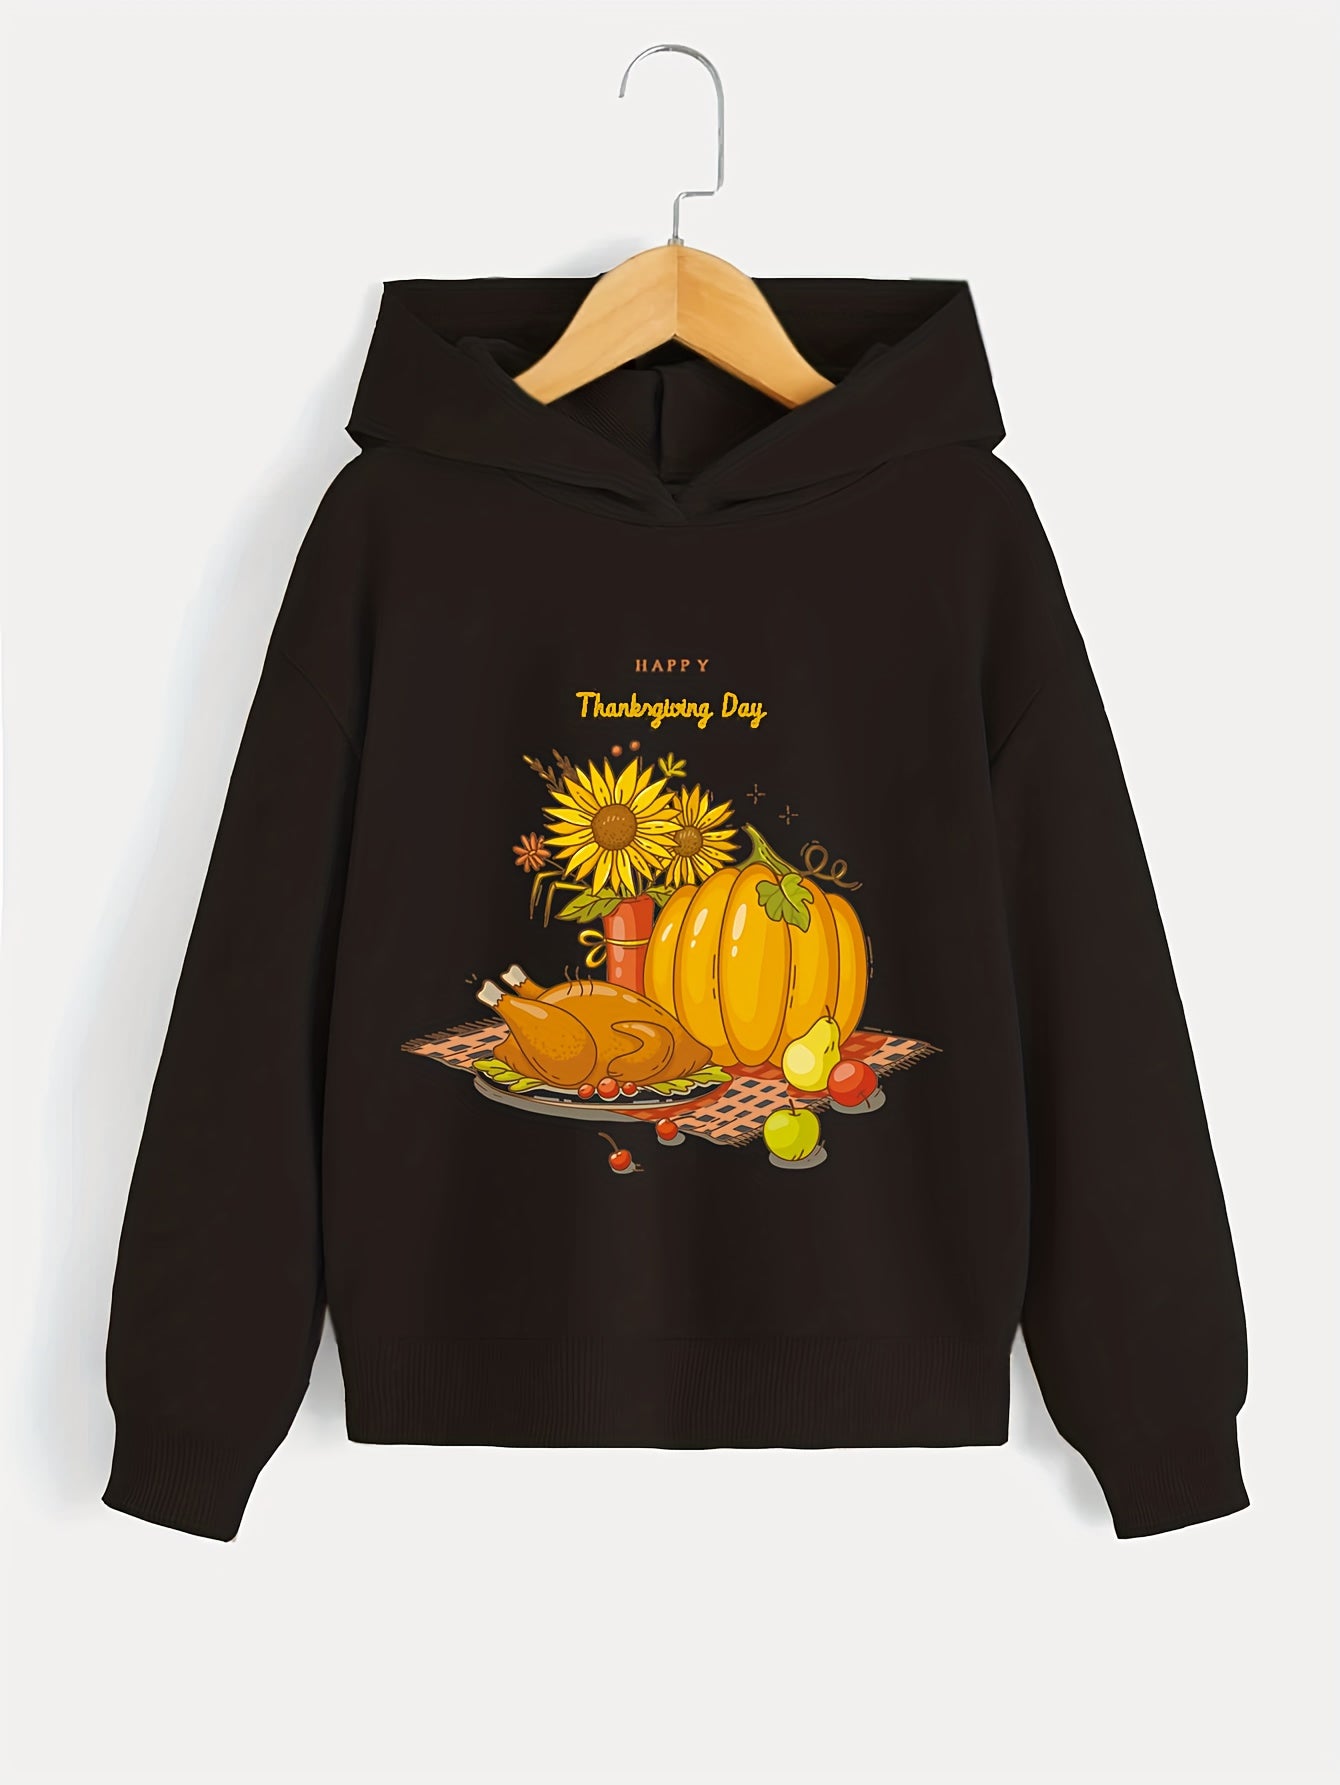 Thanksgiving Is A Time Of Togetherness & Gratitude Youth Christian Pullover Hooded Sweatshirt claimedbygoddesigns